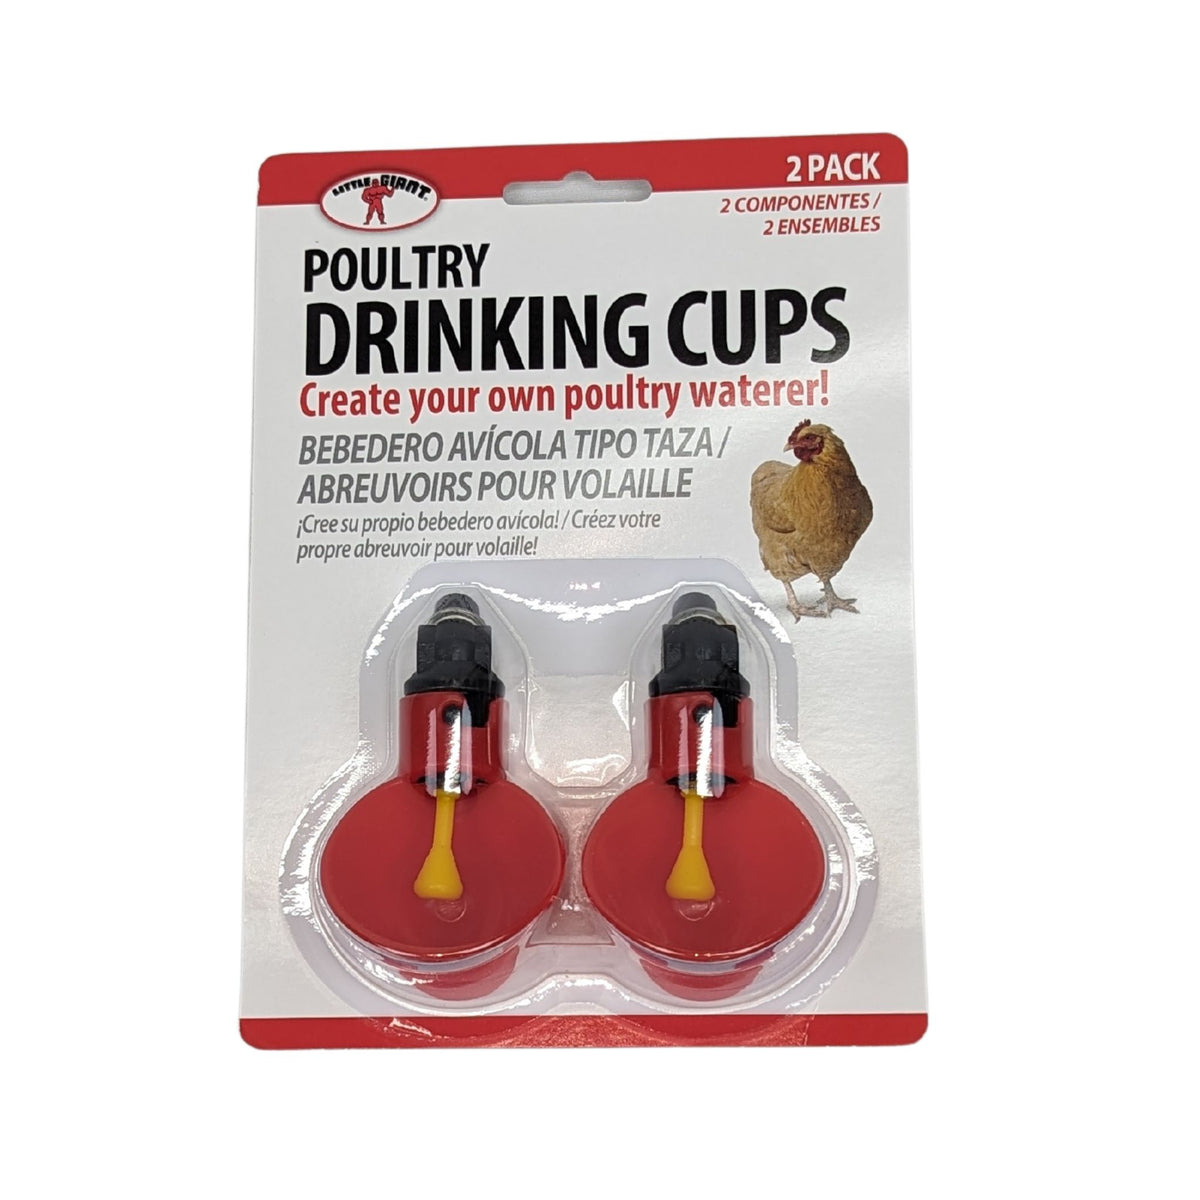 Poultry Drinking Cups